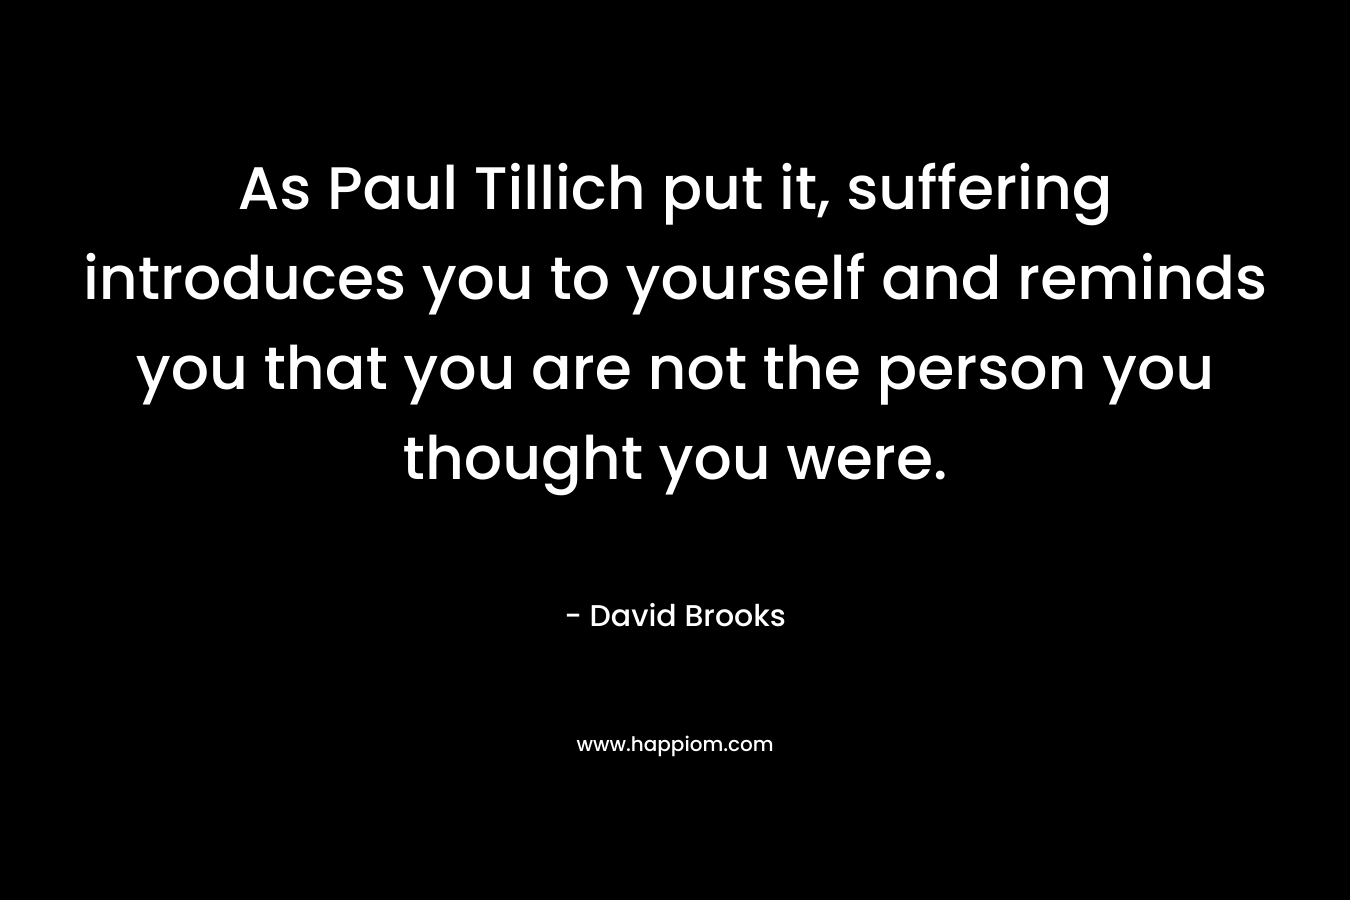 As Paul Tillich put it, suffering introduces you to yourself and reminds you that you are not the person you thought you were.